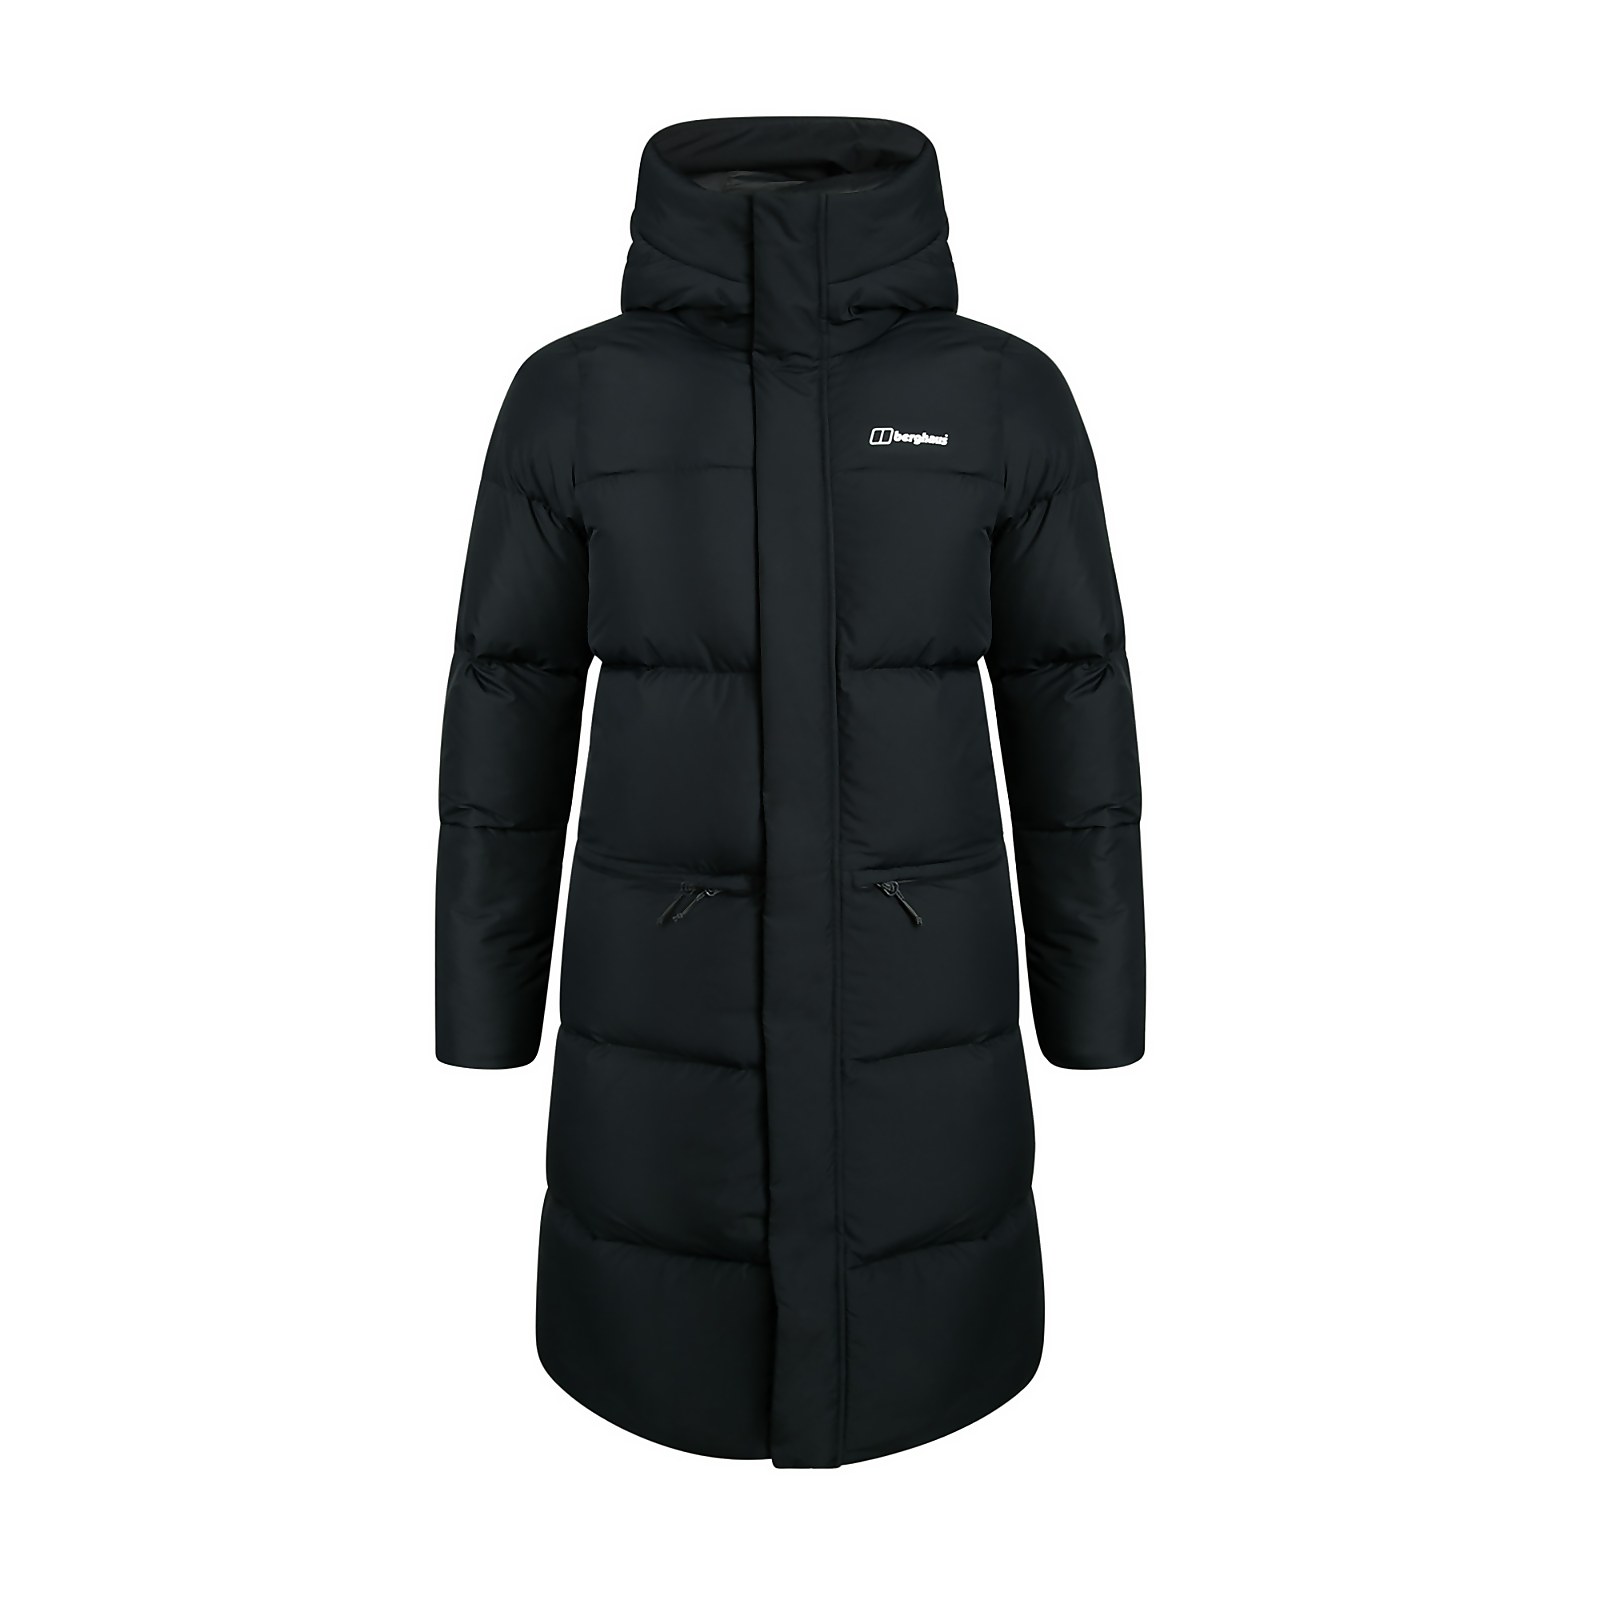 Berghaus Womens Combust Reflect Long Down Insulated Jacket - Black - 8